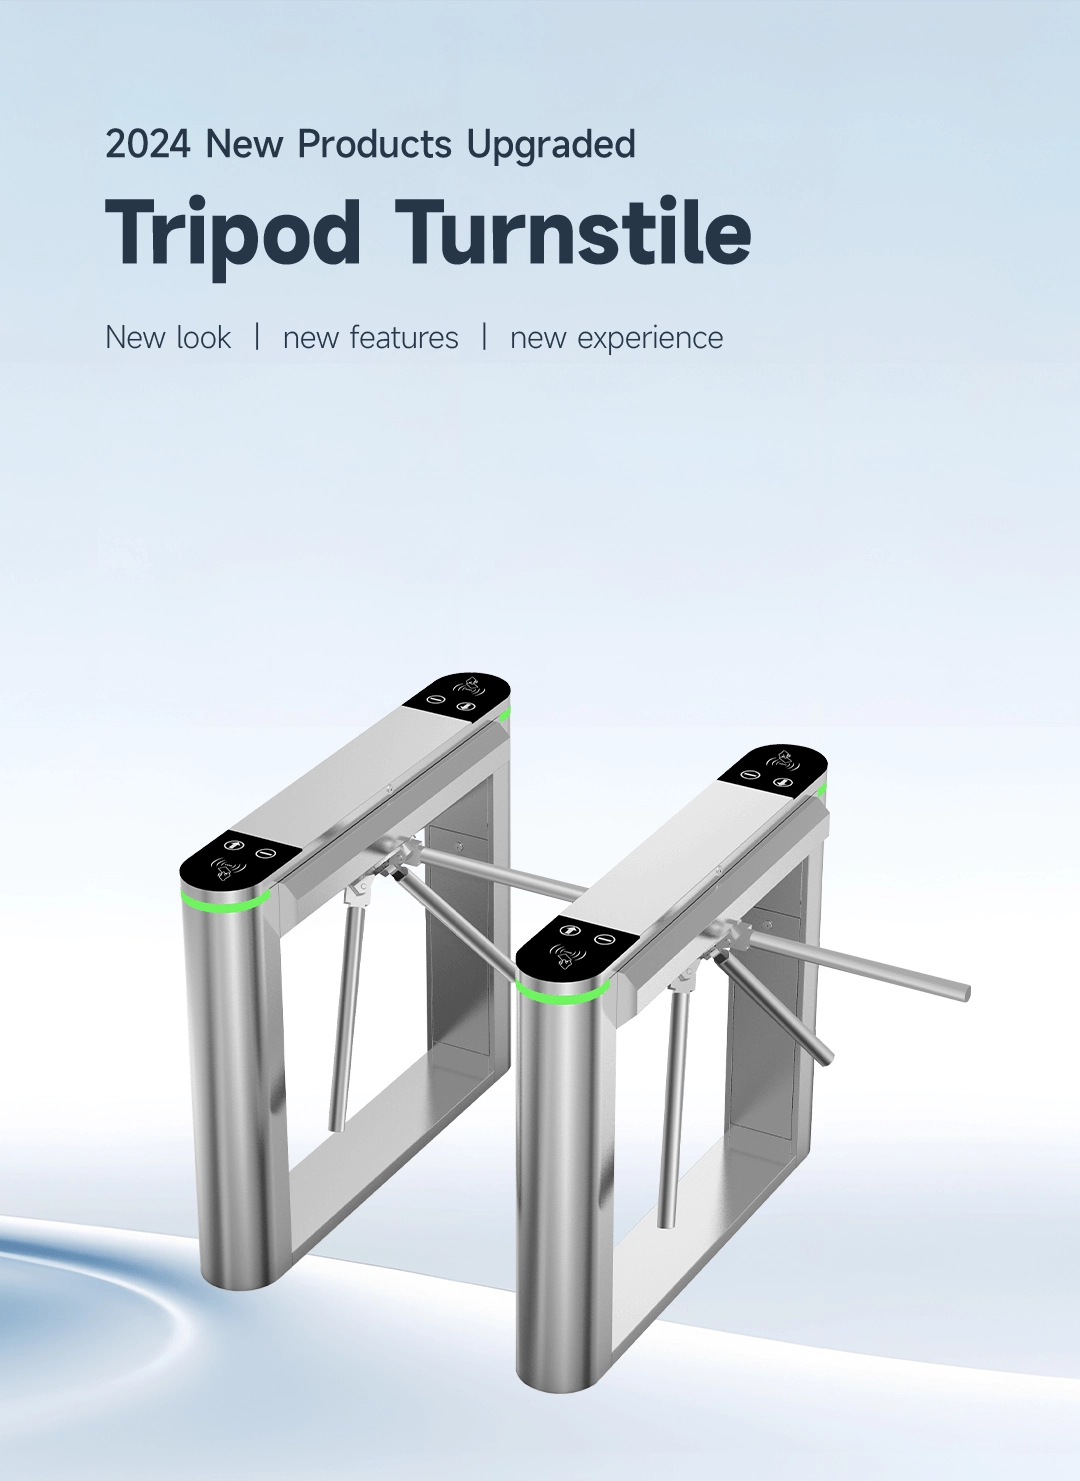 Tripod Turnstile 2024 New Products Upgraded